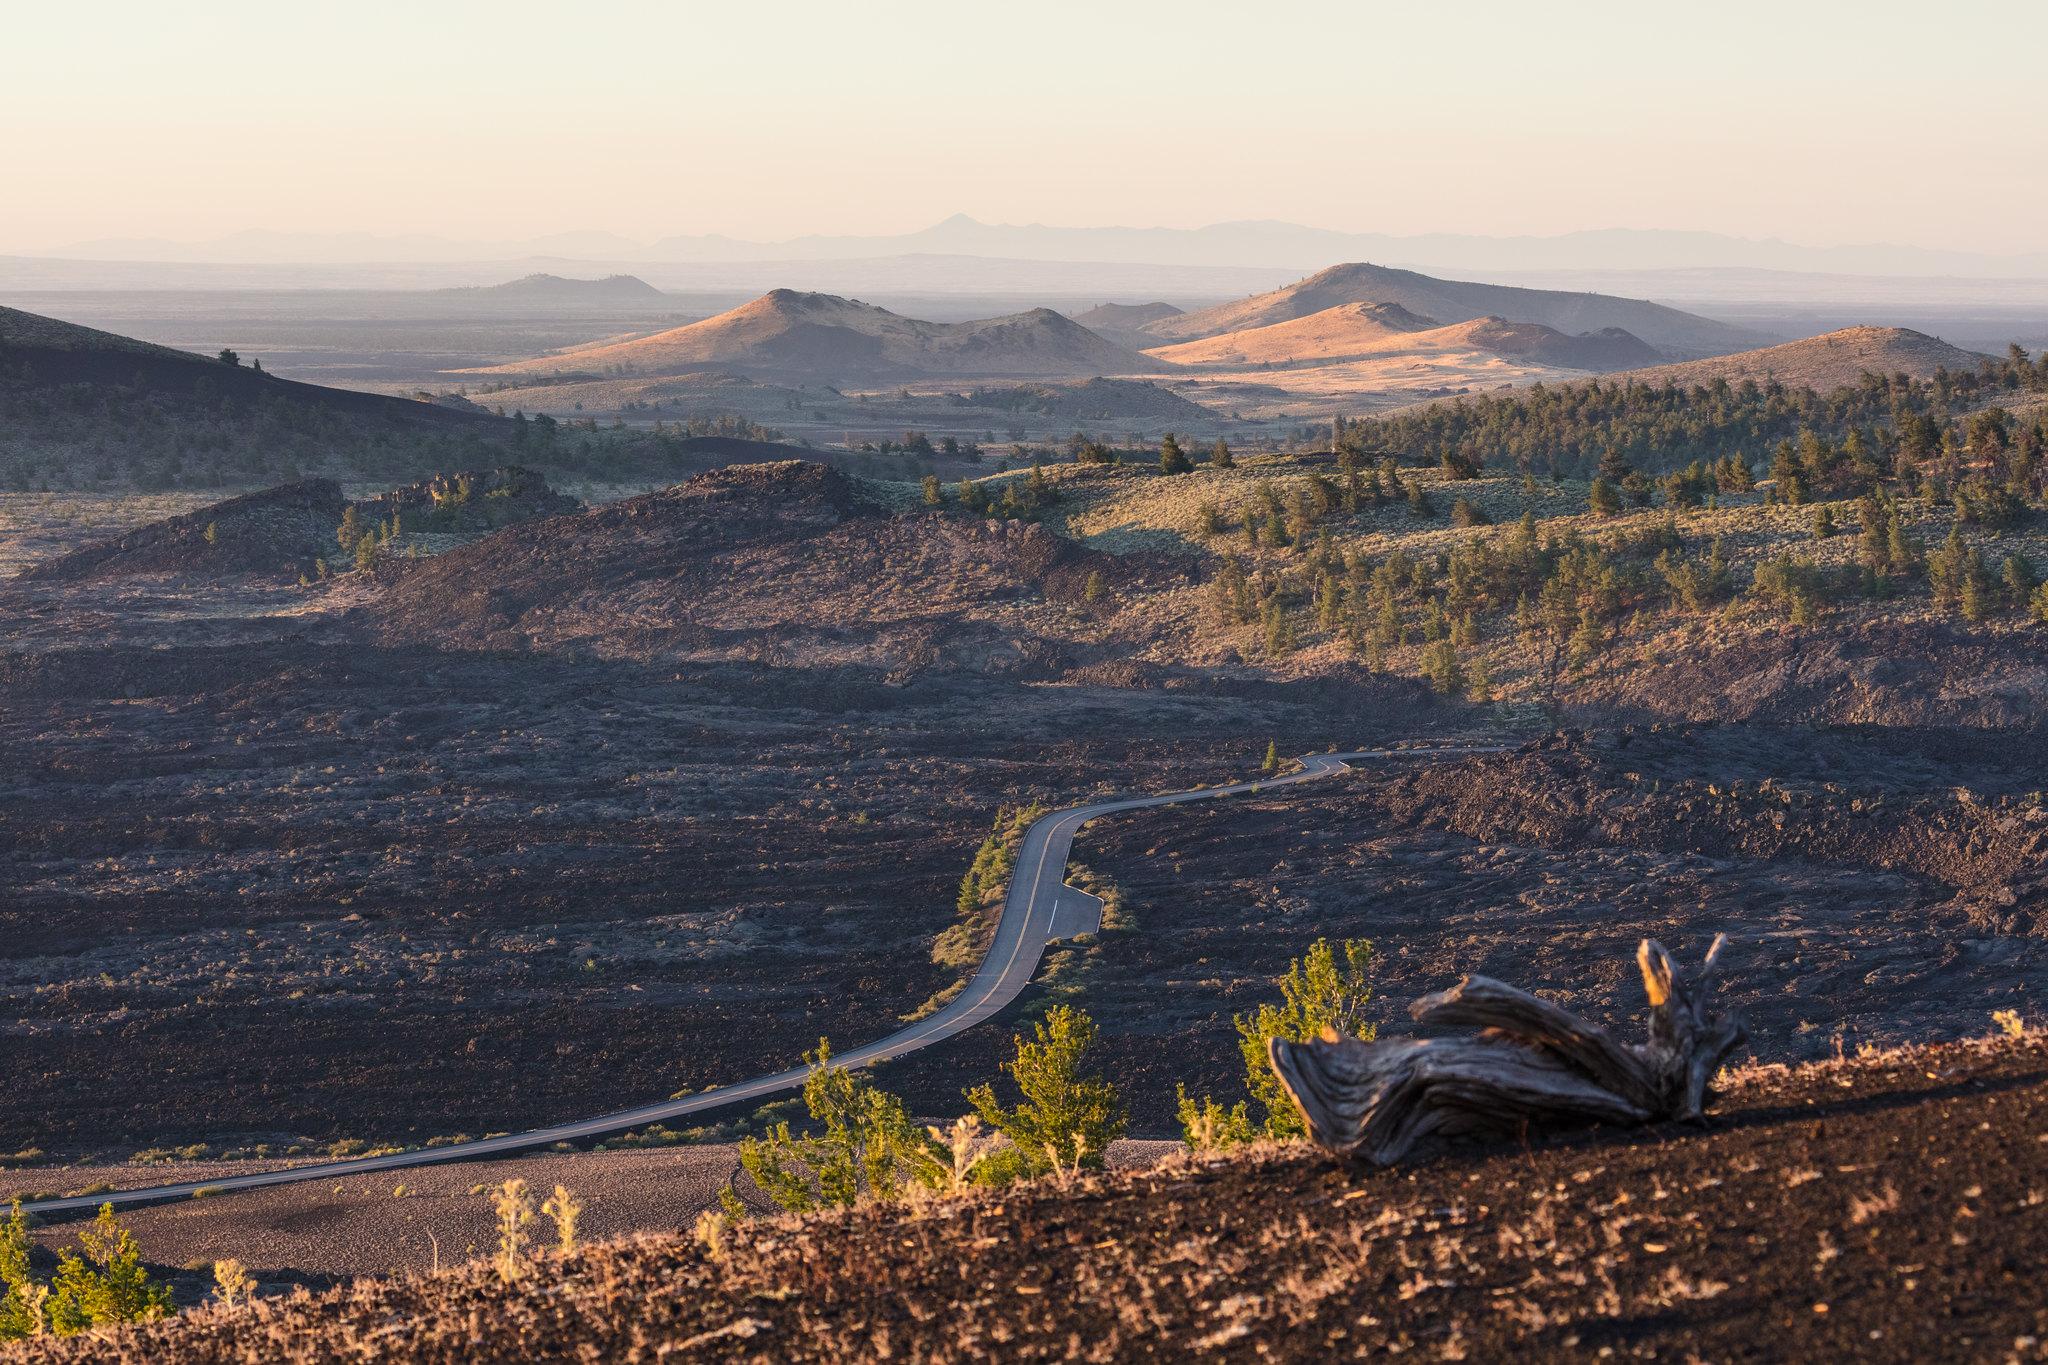 A panoramic view across the Craters landscape, bisected by a winding road.